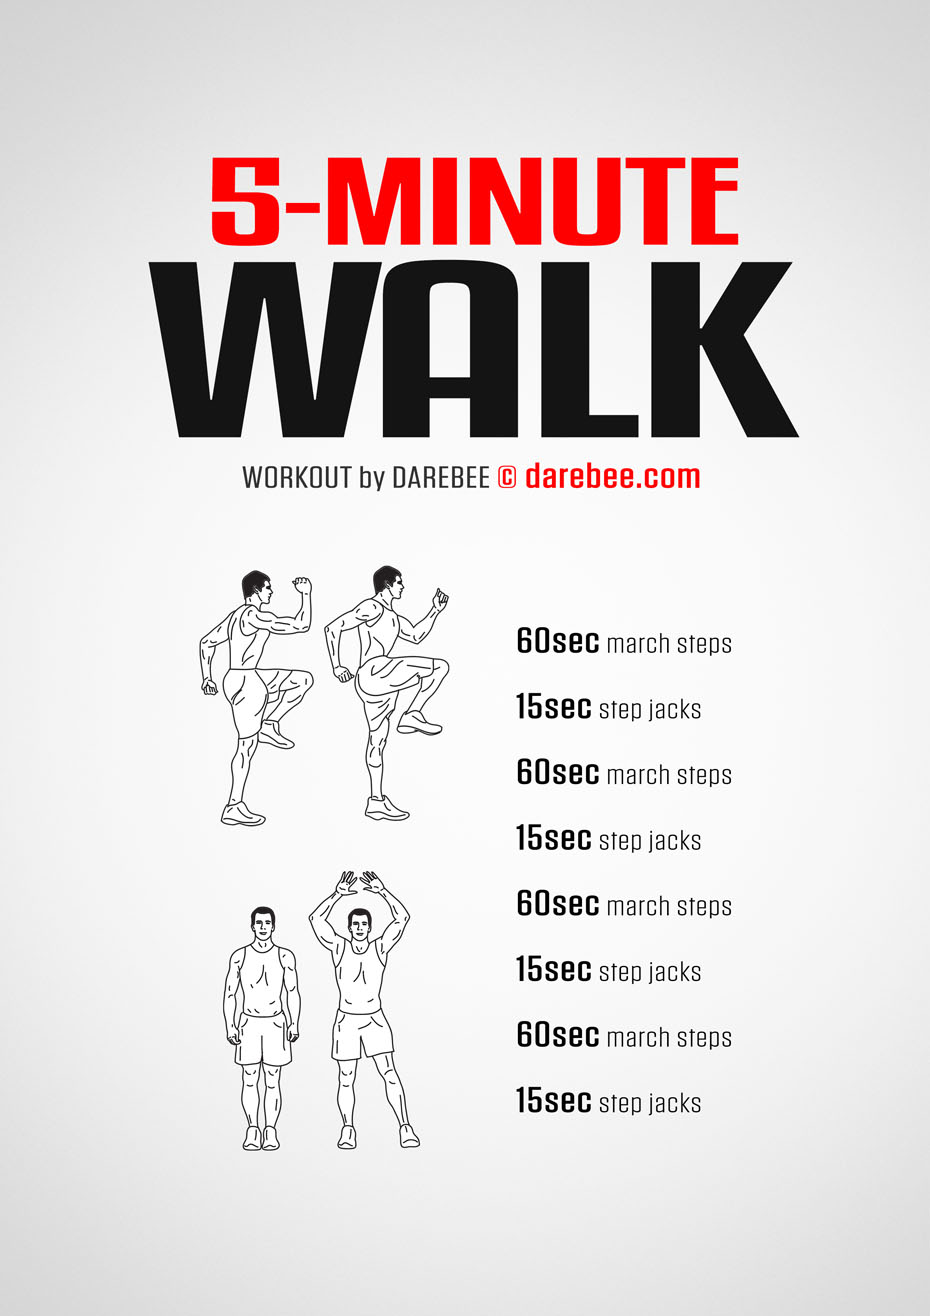 Five Minute Walk is a Darebee home-fitness microworkout you can do in just five minutes.